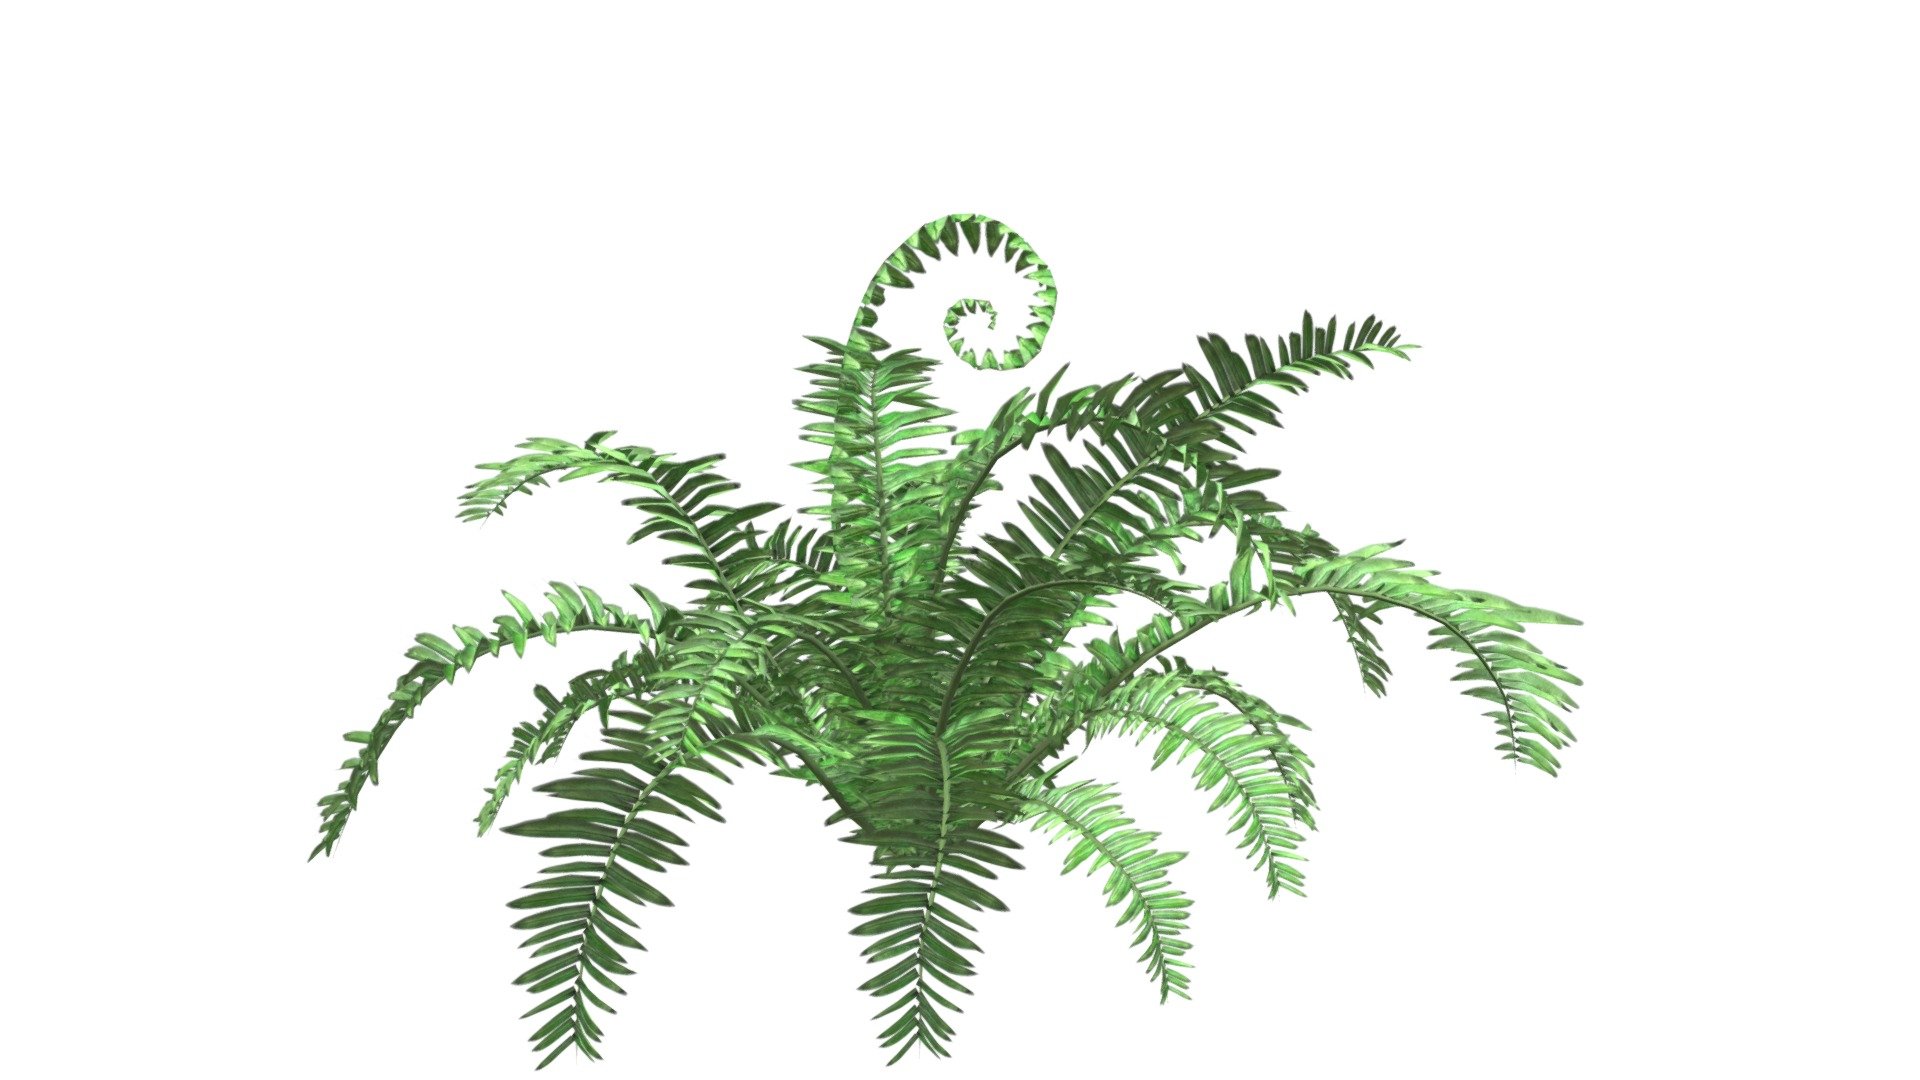 This 3D model of the Boston Fern Plant is a highly detailed and photorealistic option suitable for architectural, landscaping, and video game projects. The model is designed with carefully crafted textures that mimic the natural beauty of a real Boston Fern Plant. Its versatility allows it to bring a touch of realism to any project, whether it's a small architectural rendering or a large-scale landscape design. Additionally, the model is optimized for performance and features efficient UV mapping. This photorealistic 3D model is the perfect solution for architects, landscapers, and game developers who want to enhance the visual experience of their project with a highly detailed, photorealistic Boston Fern Plant 3d model